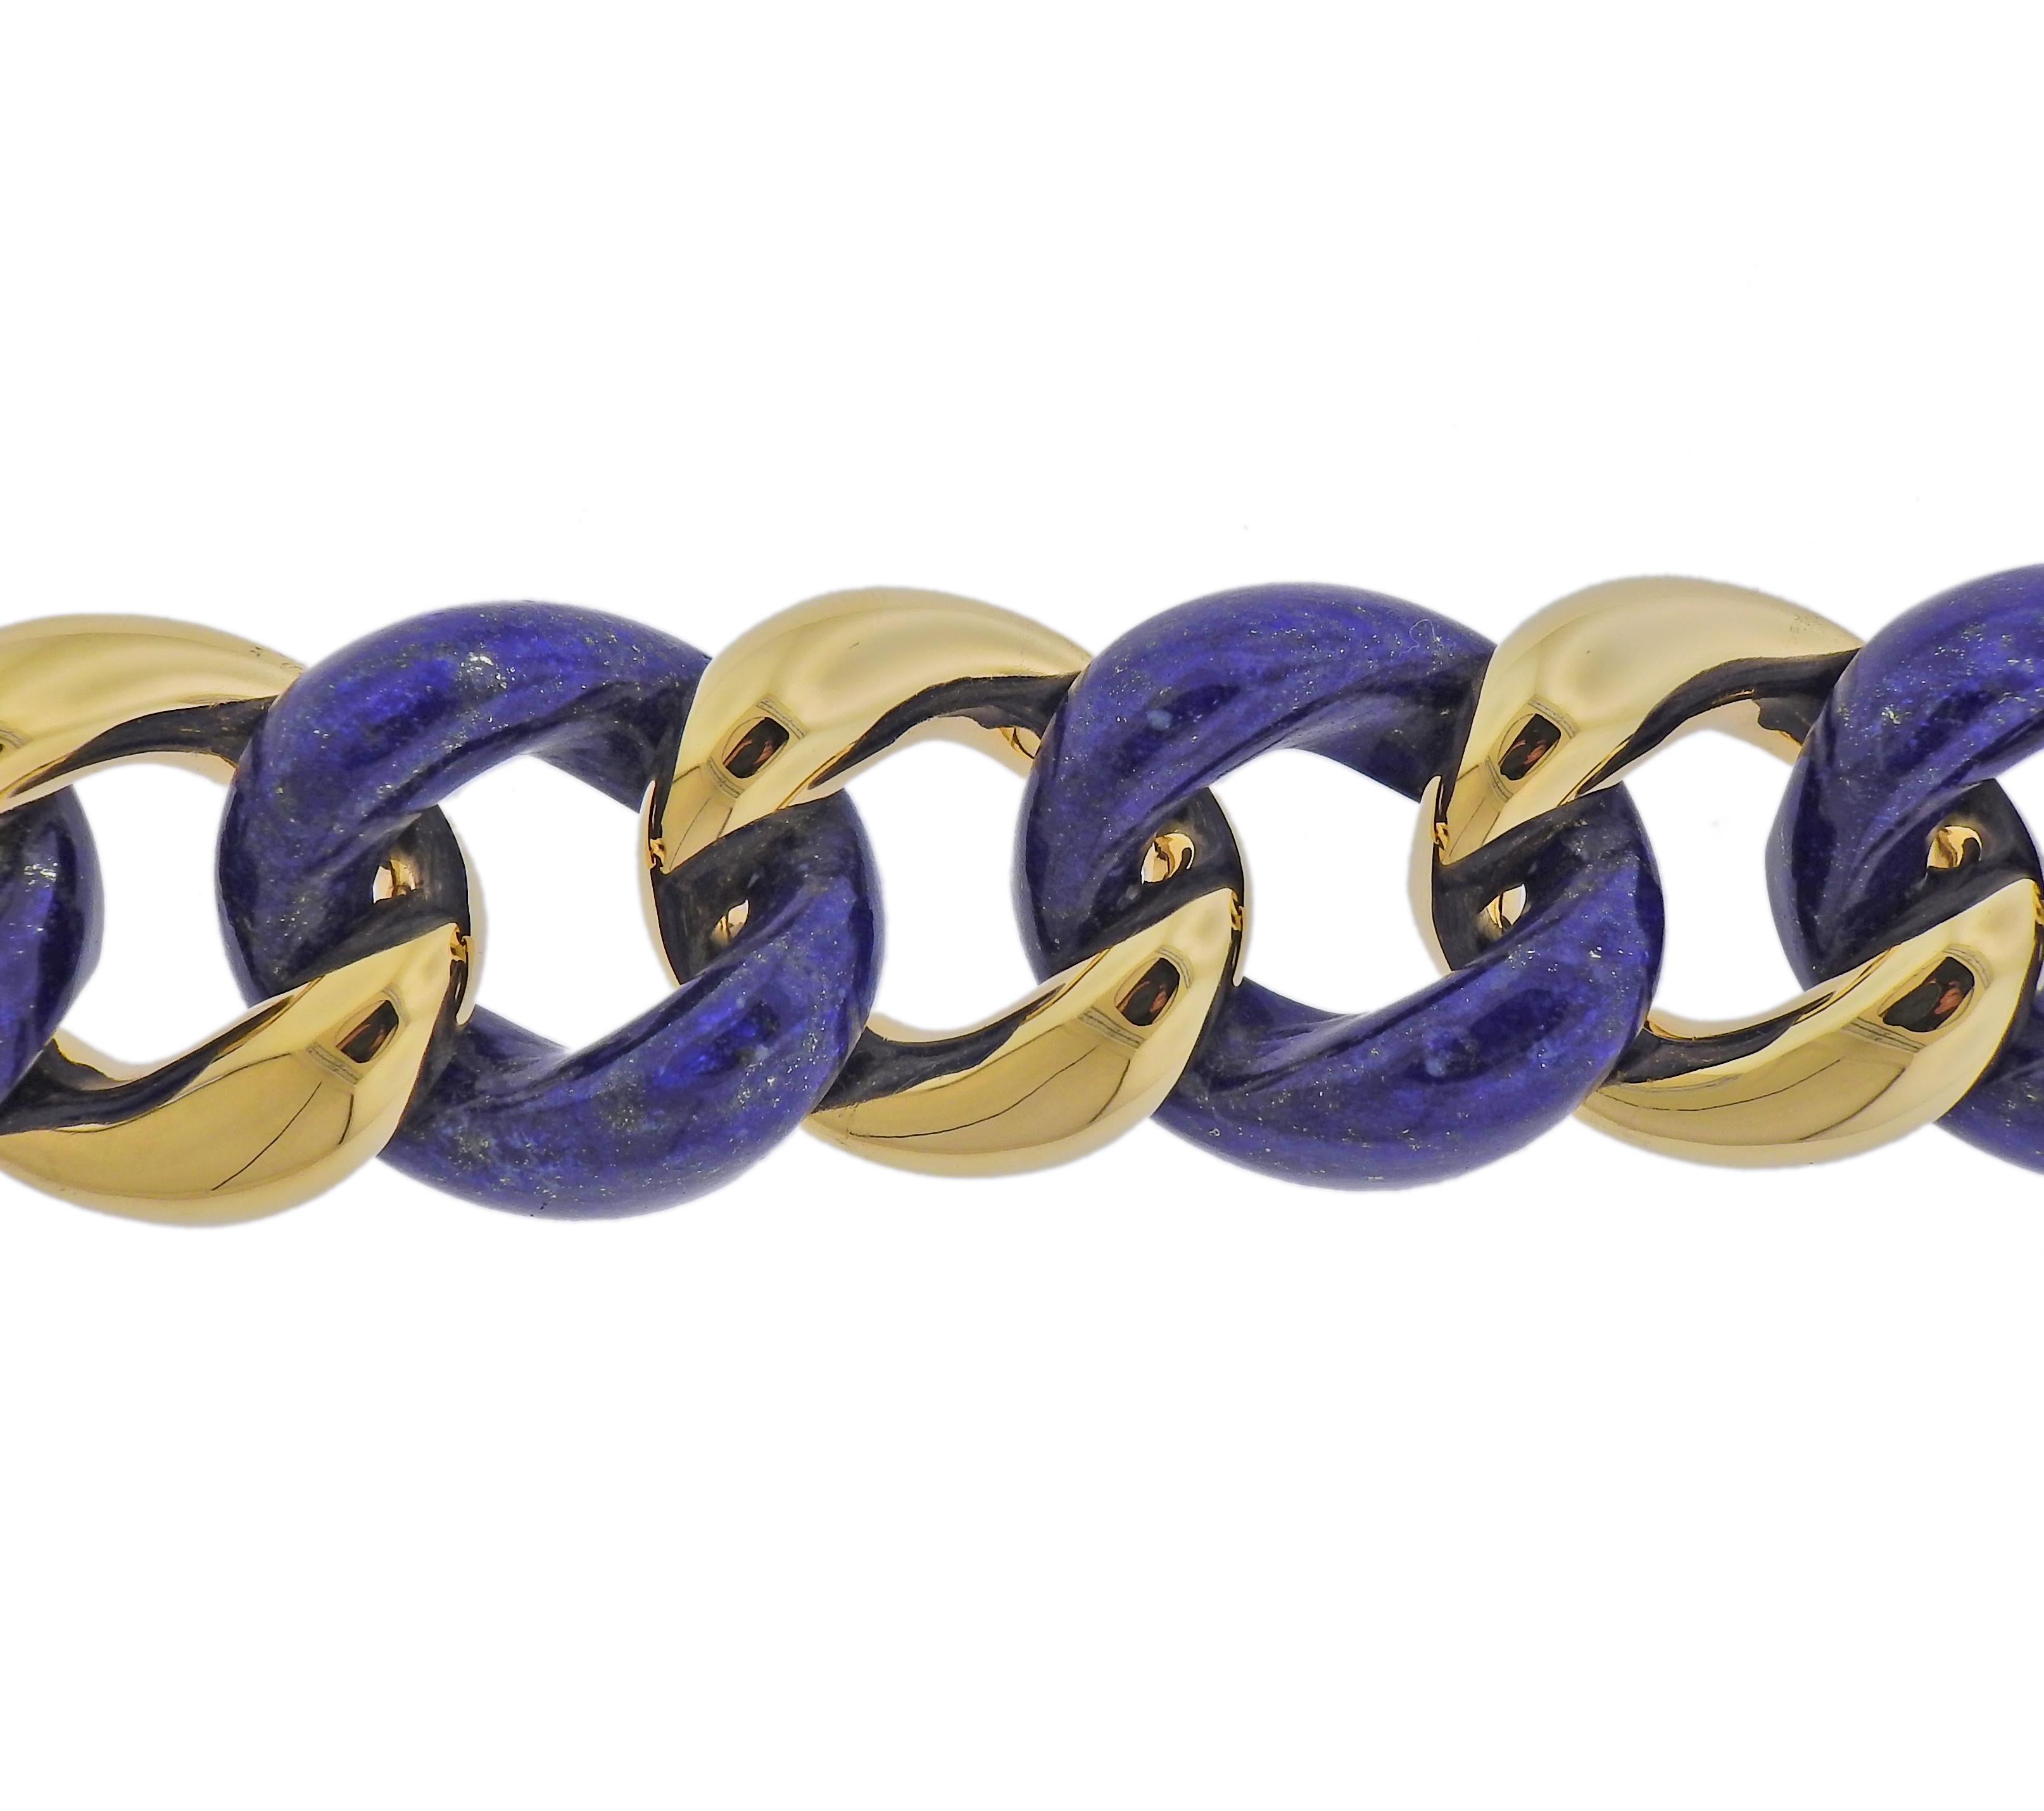 Brand new Seaman Schepps large link bracelet in 18k gold with lapis lazuli. Comes with box.  Bracelet is 7.75